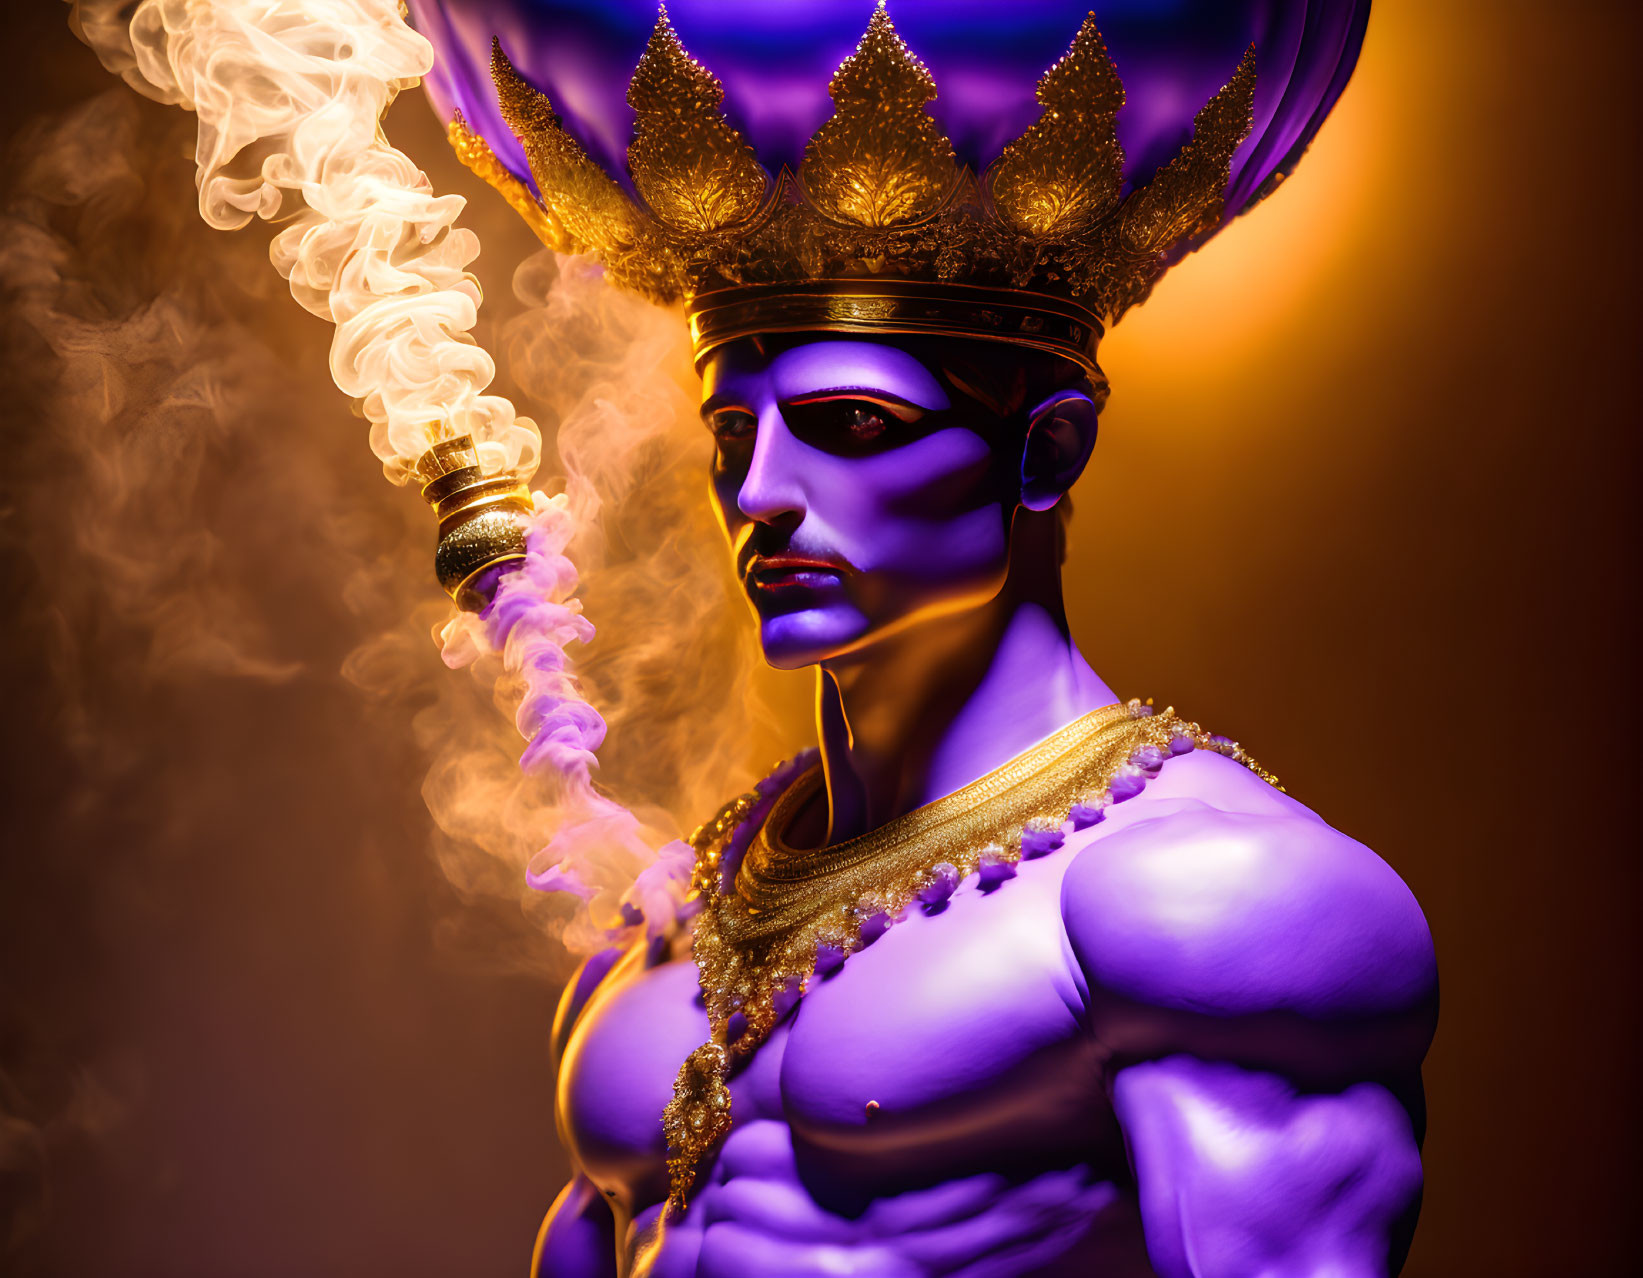 Purple-skinned character with golden crown and ornaments on orange background holding smoking object